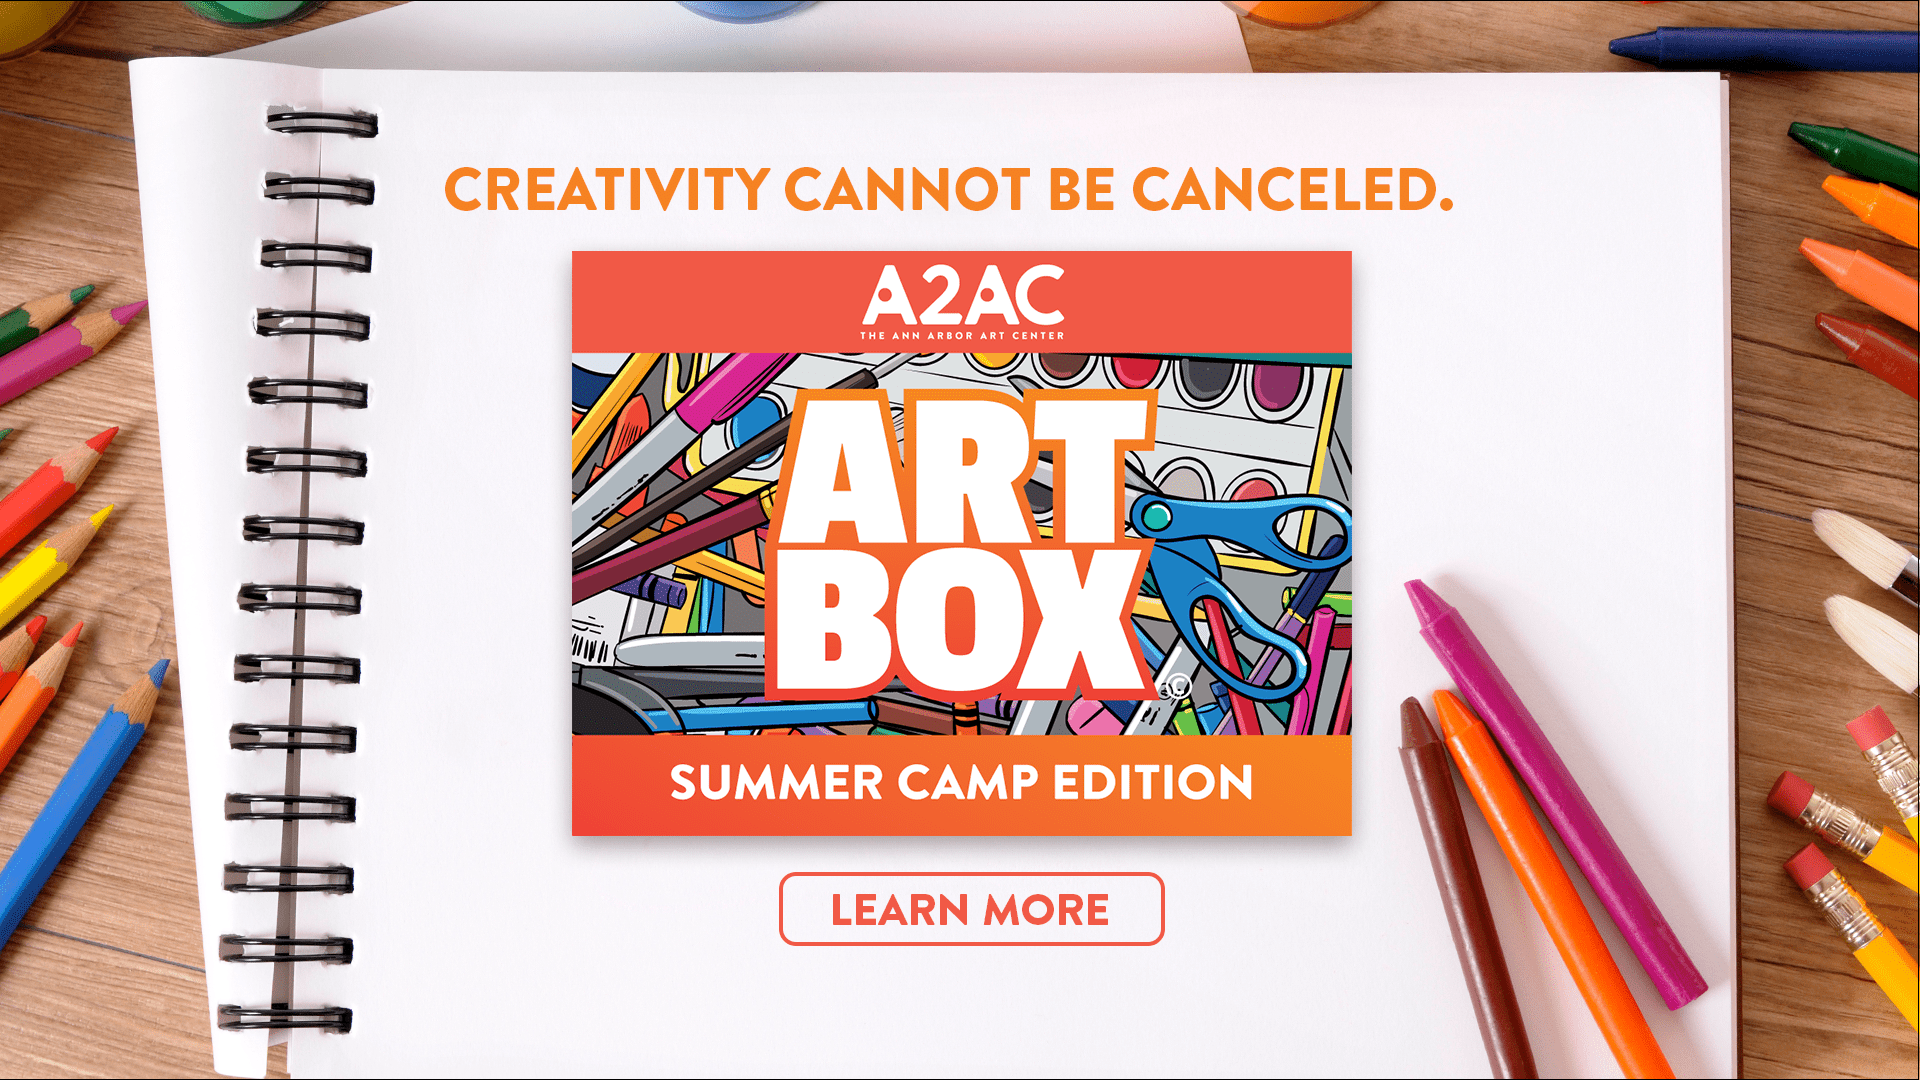 With in-person summer camps canceled, Ann Arbor Art Center announces virtual art camp